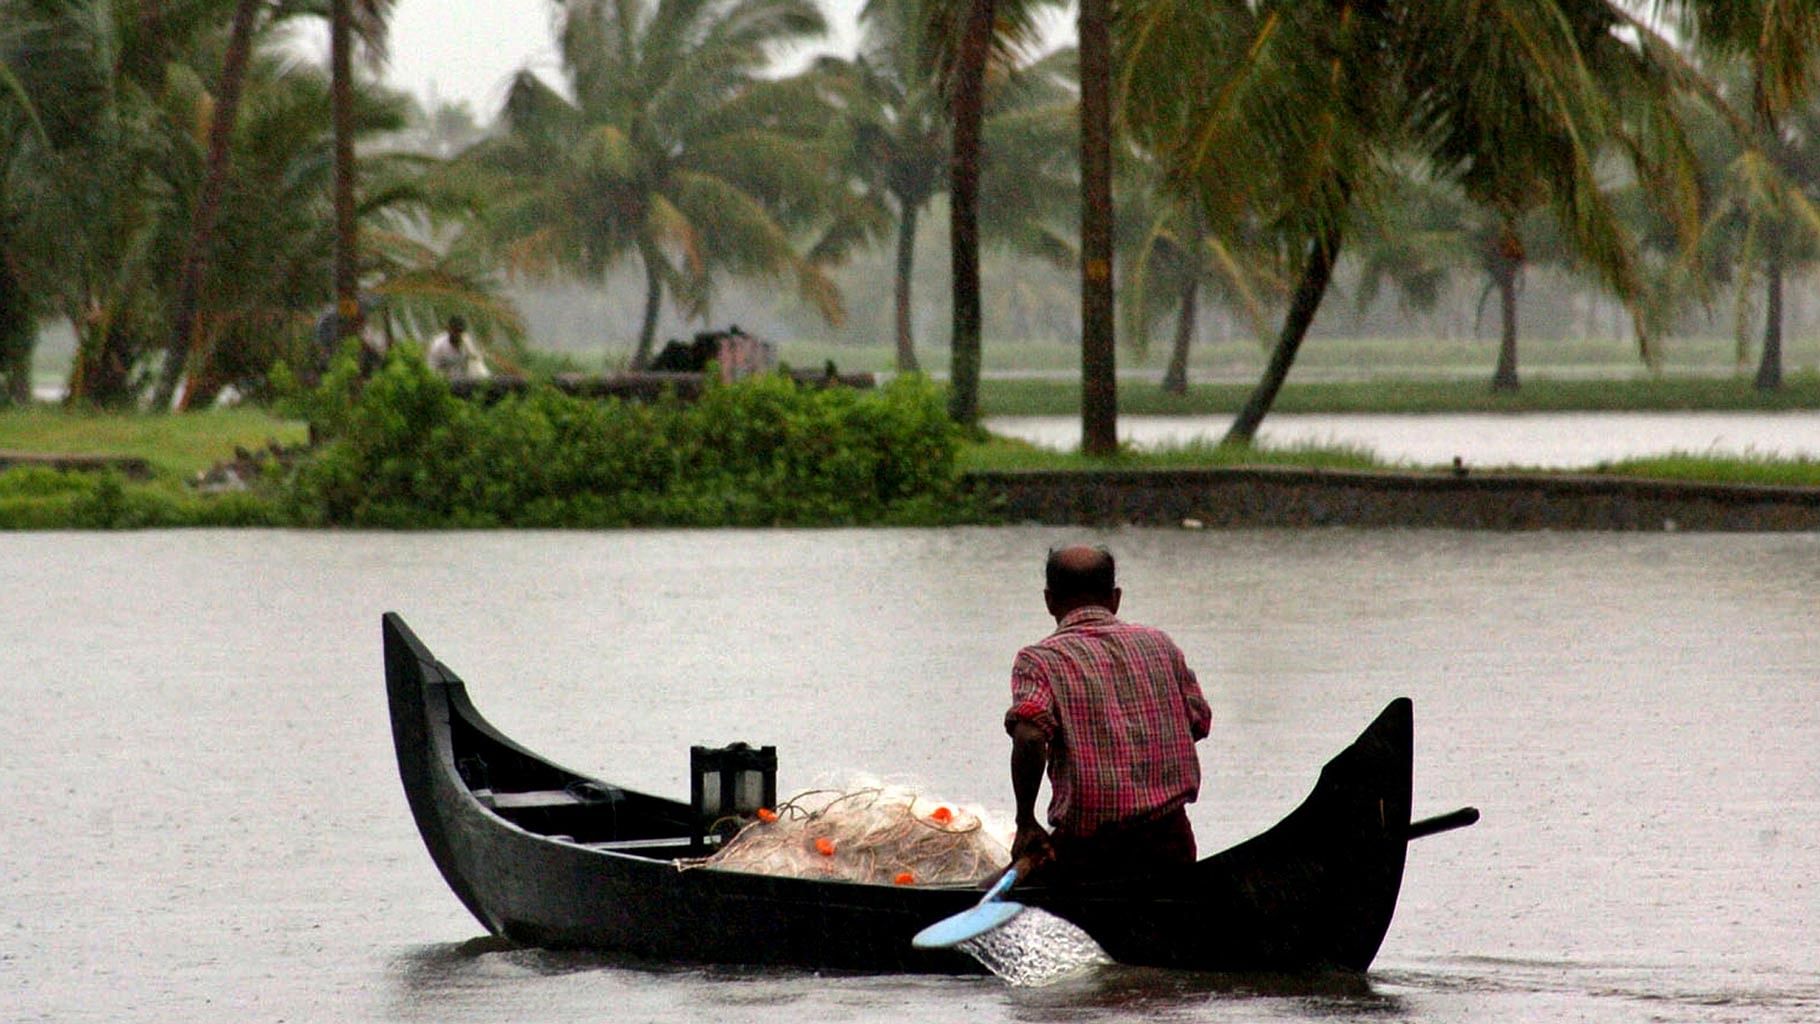 A fisherman rowing his boat during monsoons in Alleppy, Kerala. Image used for representational purpose only.